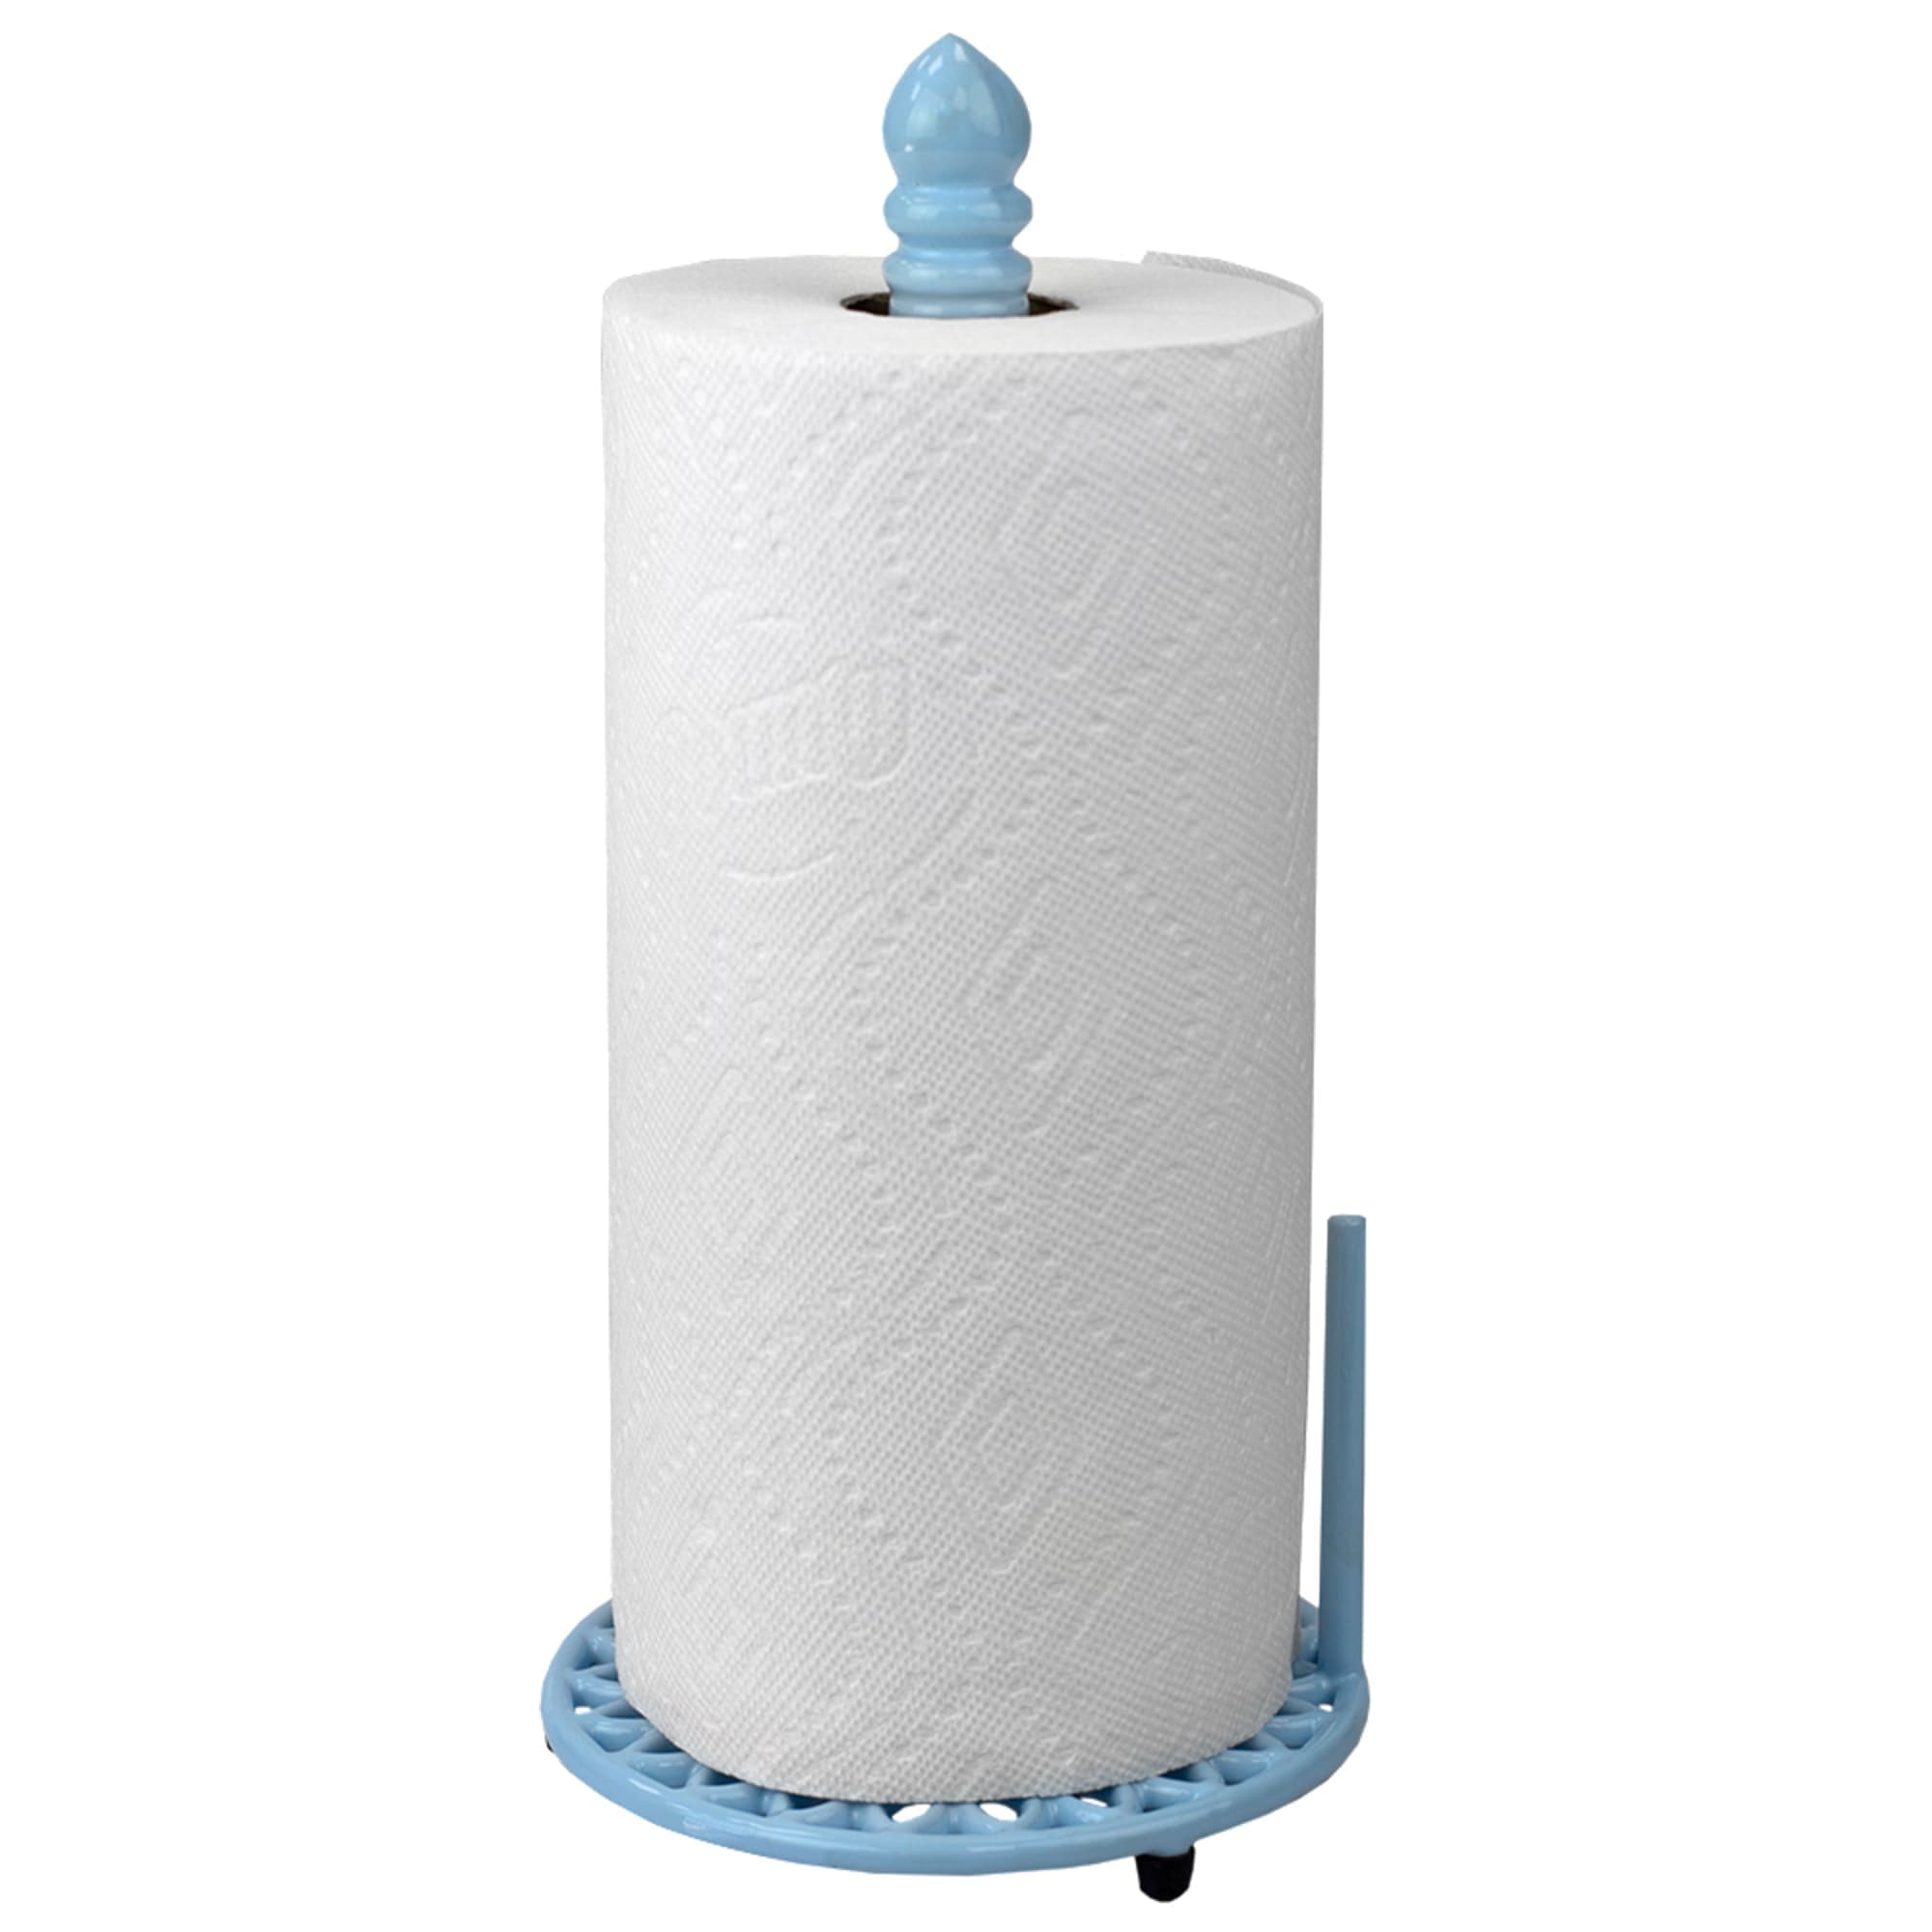 Home Basics Sunflower Free-Standing Cast Iron Paper Towel Holder with Dispensing Side Bar, Blue $8.00 EACH, CASE PACK OF 3